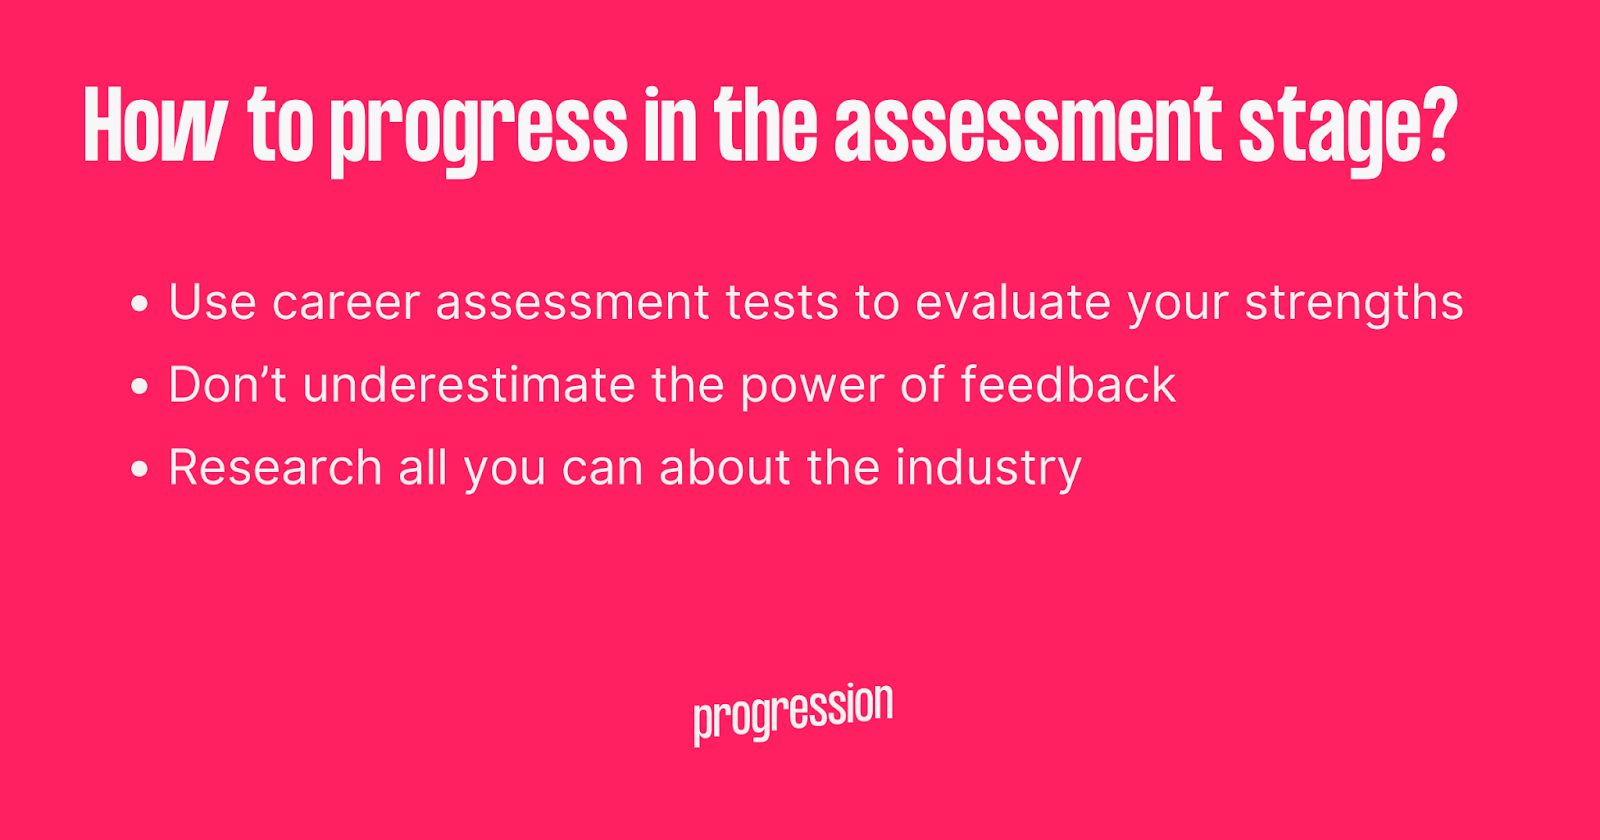 How to progress in the assessment stage